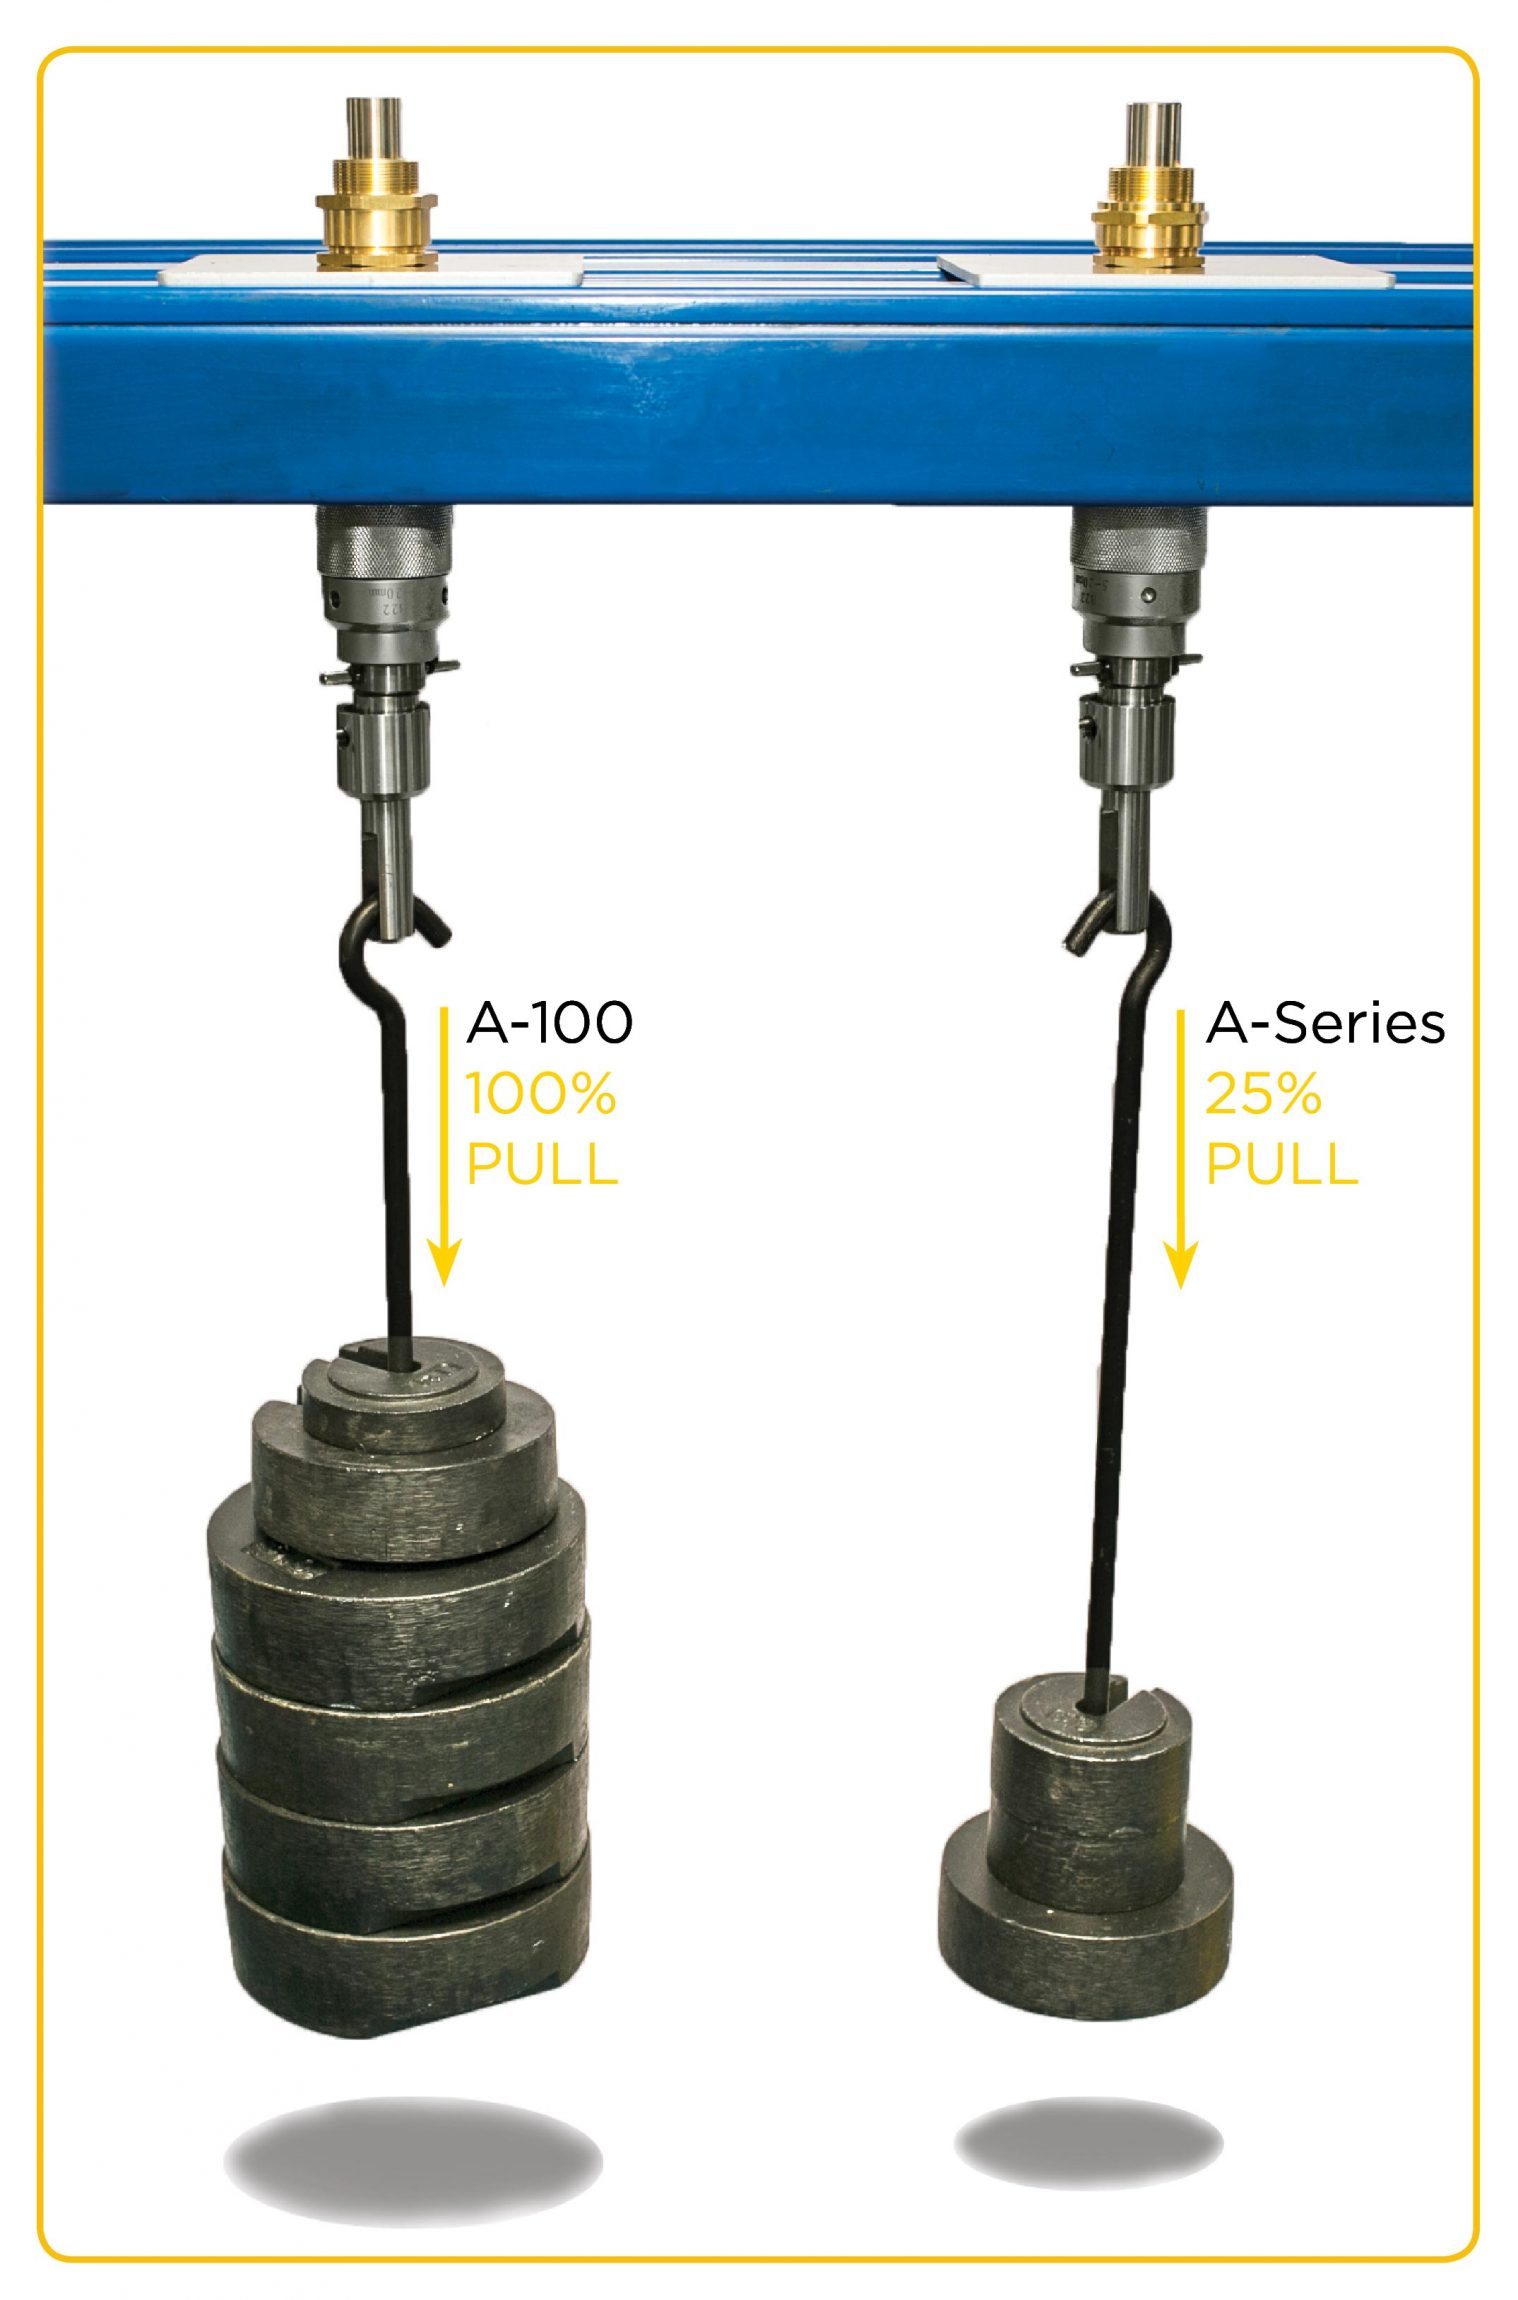 Introducing the new A-100 Series of Cable Glands from CMP: 100